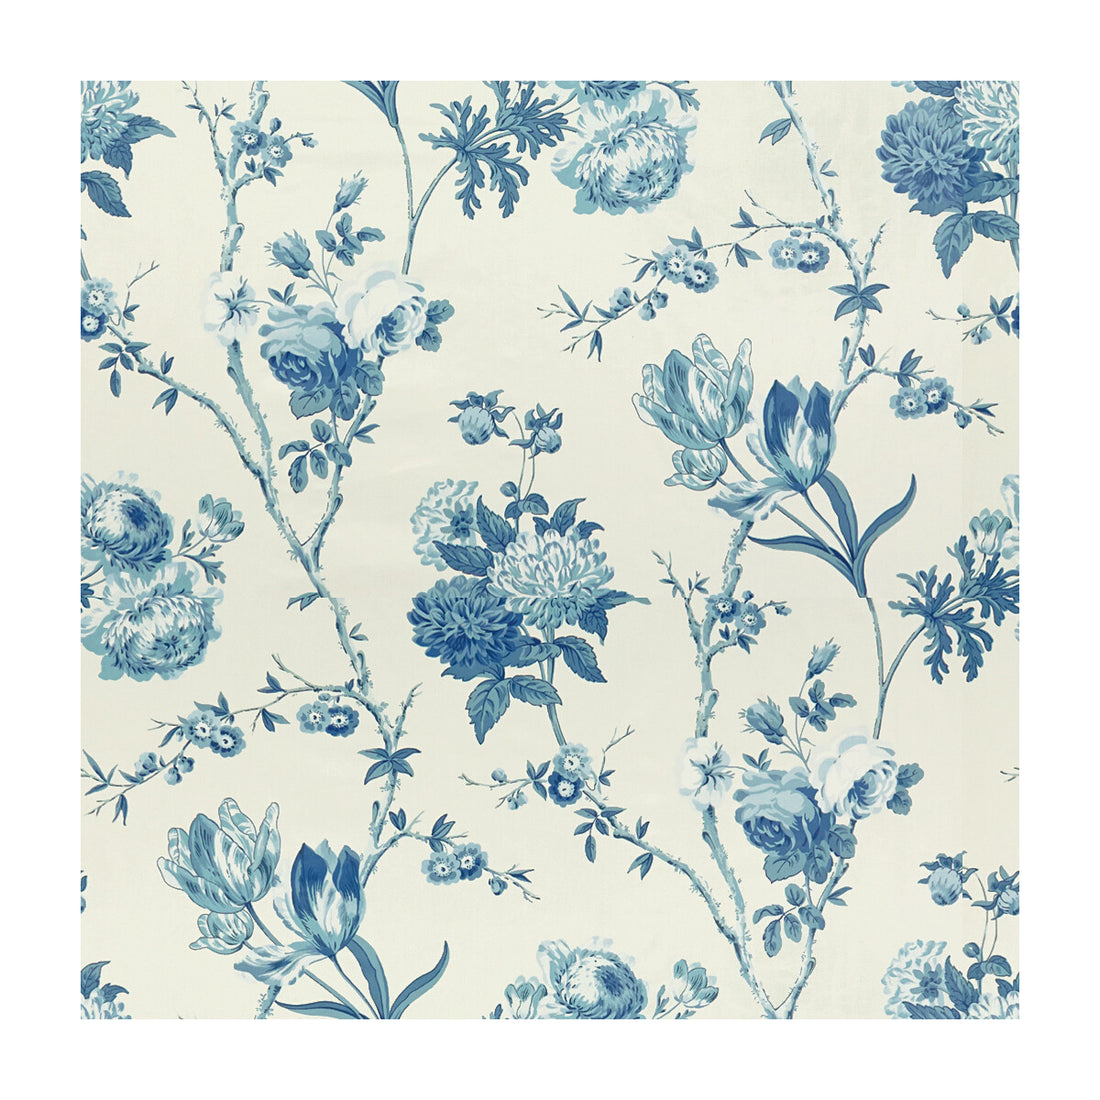 Allegra fabric in blues color - pattern 2015132.515.0 - by Lee Jofa in the Parish-Hadley collection